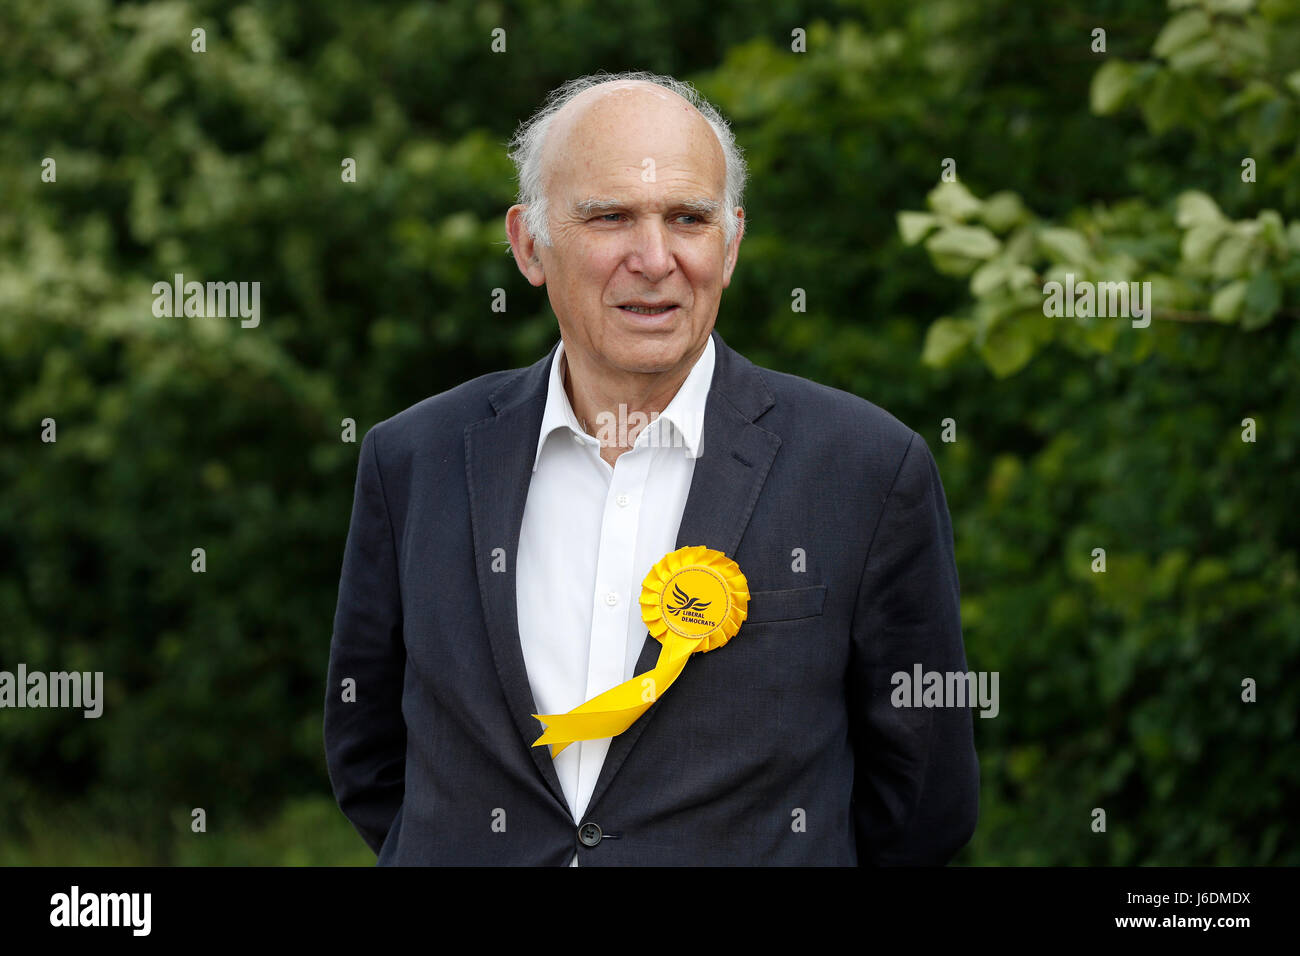 Liberal Democrat candidate Vince Cable out campaigning in Twickenham ahead of Britain's upcoming General Election in June 2017 Stock Photo